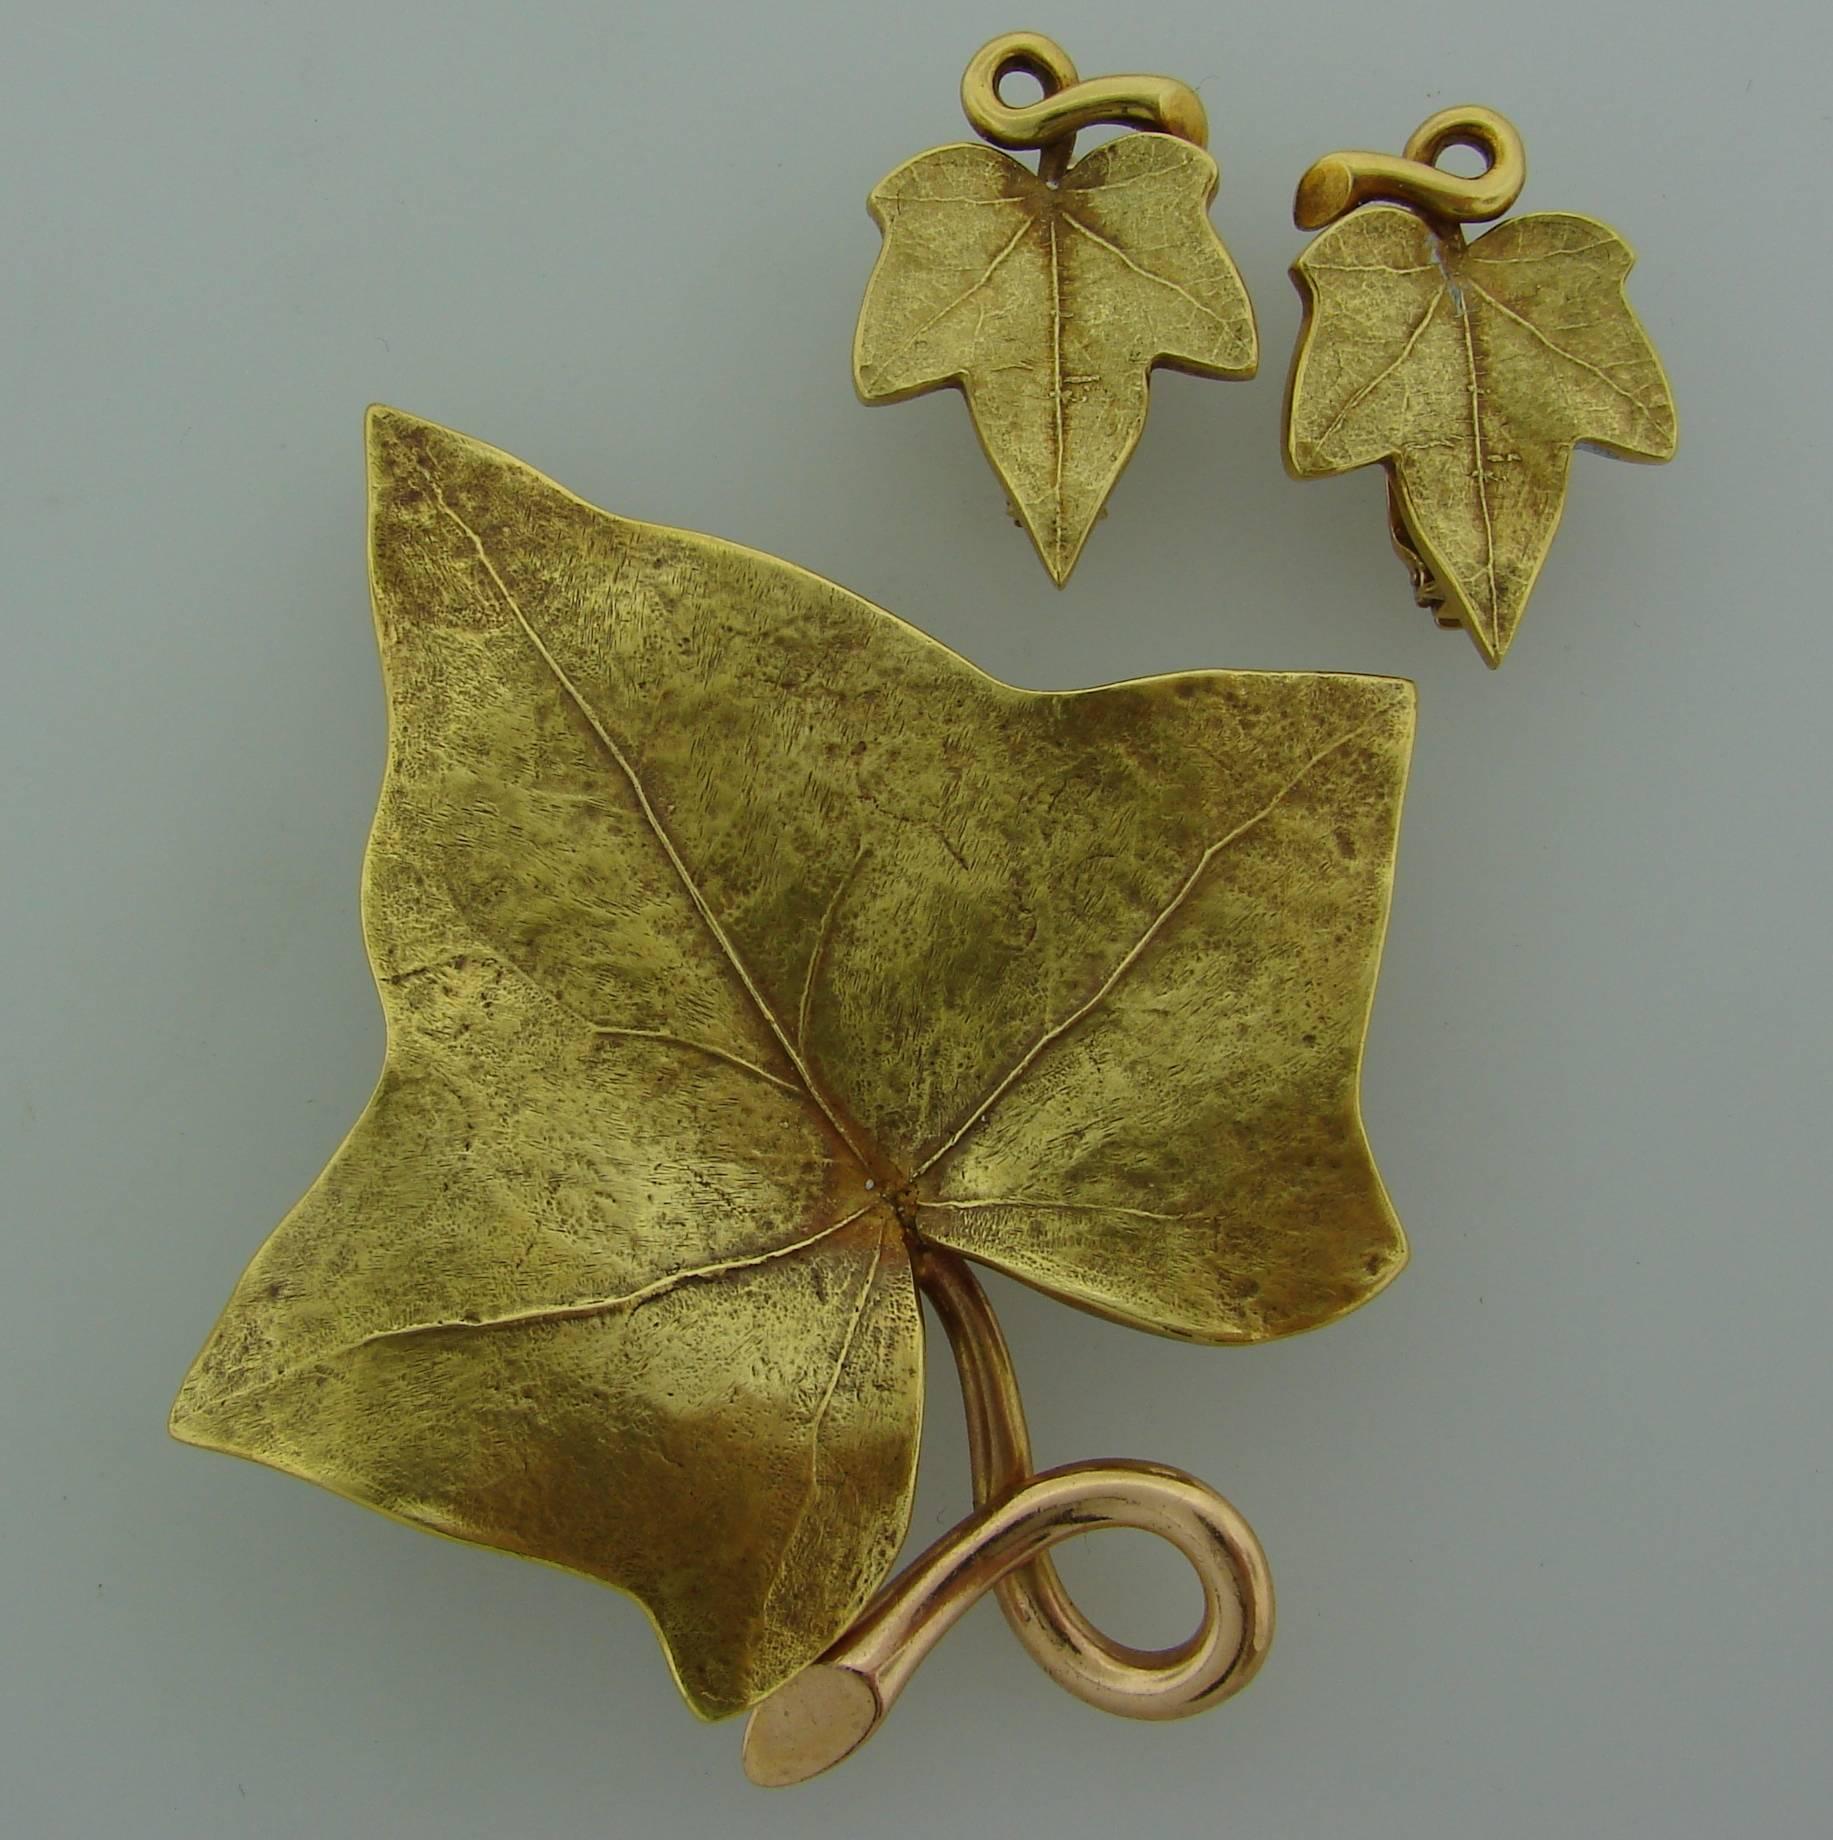 French chic Grape Leaf set consisting of a clip and a pair of earrings was created by Cartier in the 1950's. It makes a tasteful accent to any outfit. 
The pin is made of 14 karat (stamped) yellow gold. The earrings are made of 14 karat (tested)